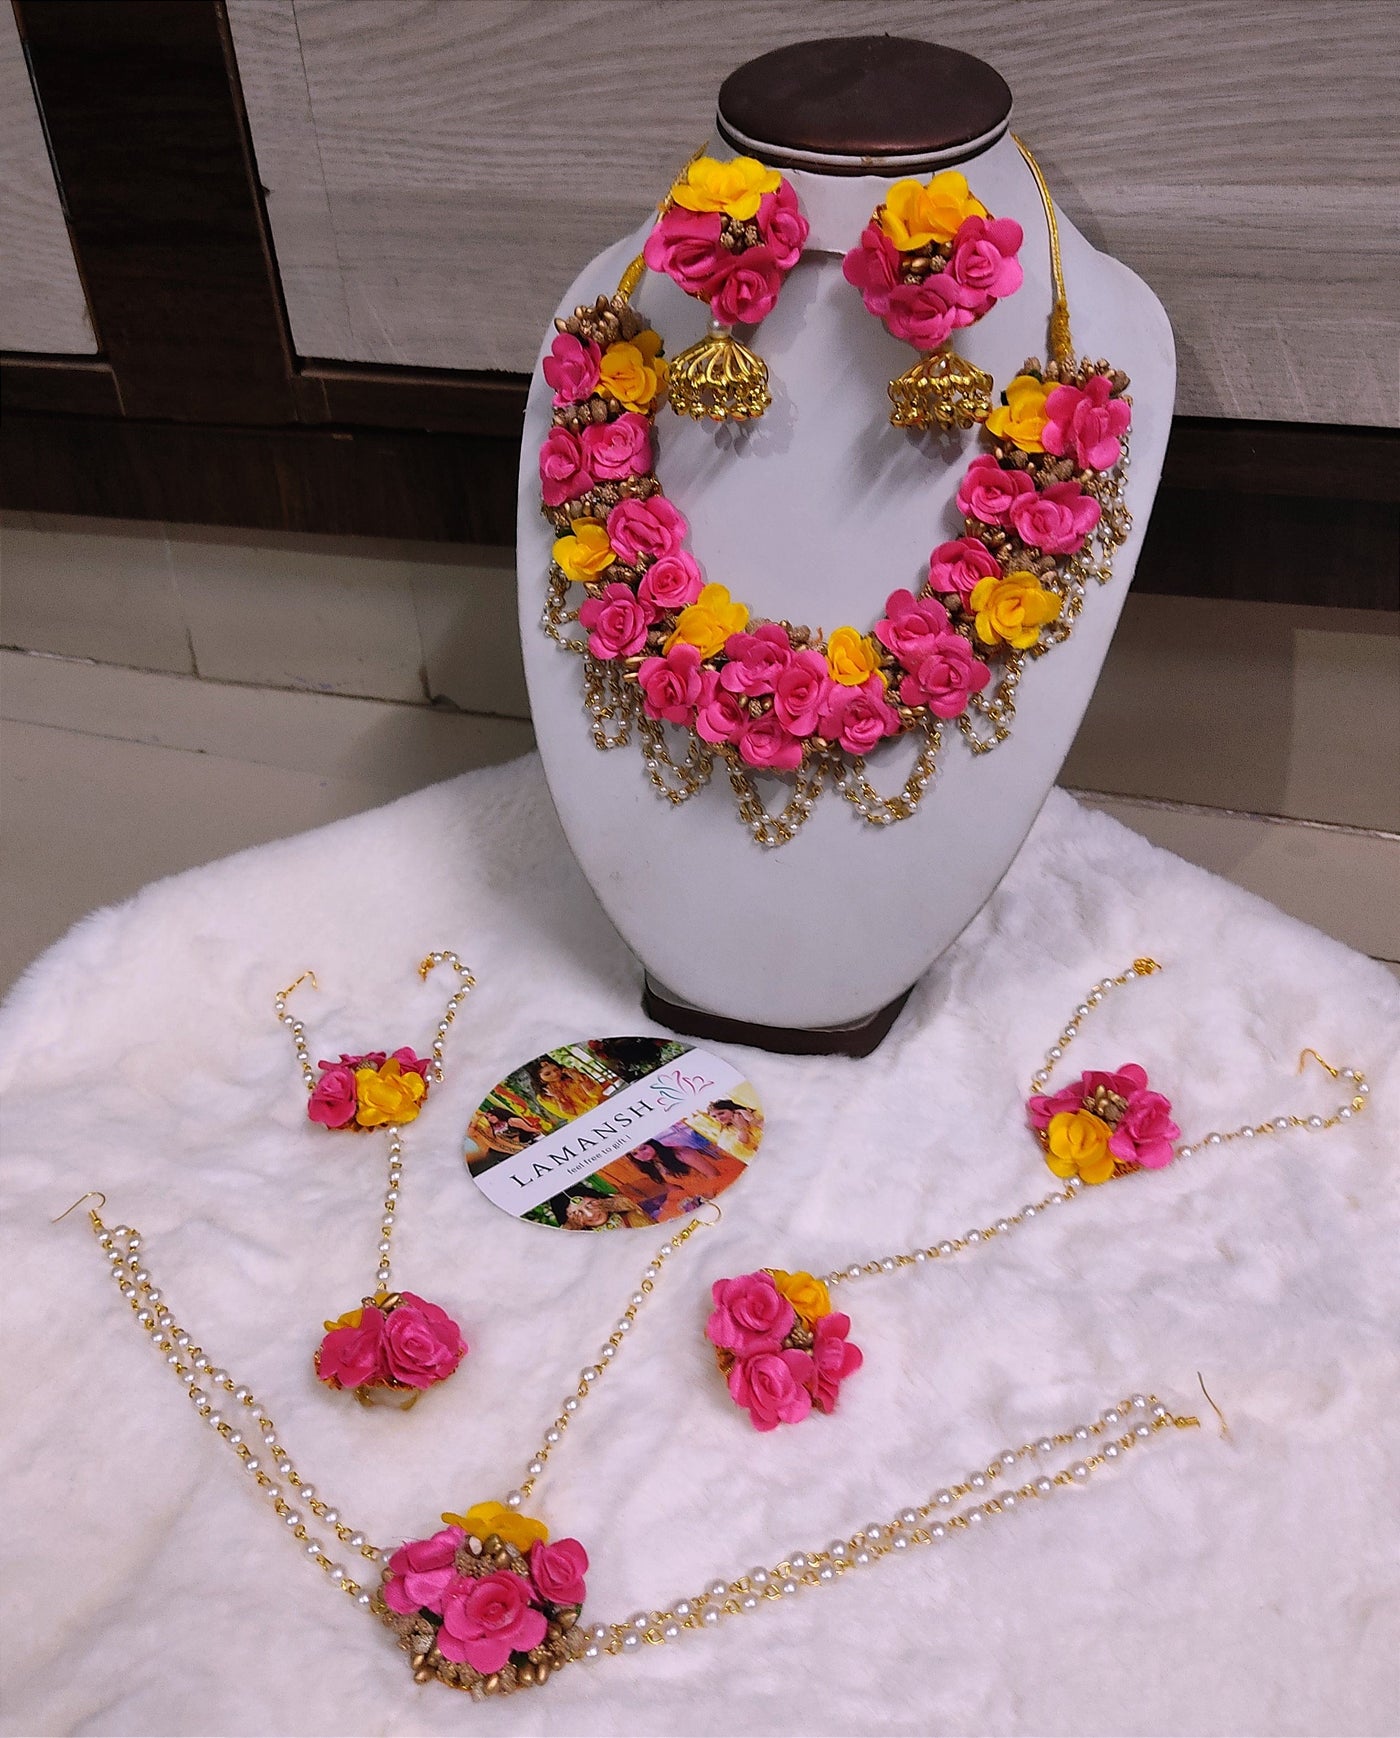 Lamansh Flower Jewellery 1 Necklace, 2 Jhumki Earrings , 1 Maangtika with side chain , 2 Bracelets attached to ring / Pink-Yellow LAMANSH® Bridal Artificial Floral 💗 Jewellery Set| Fabric Flower Jewelry set